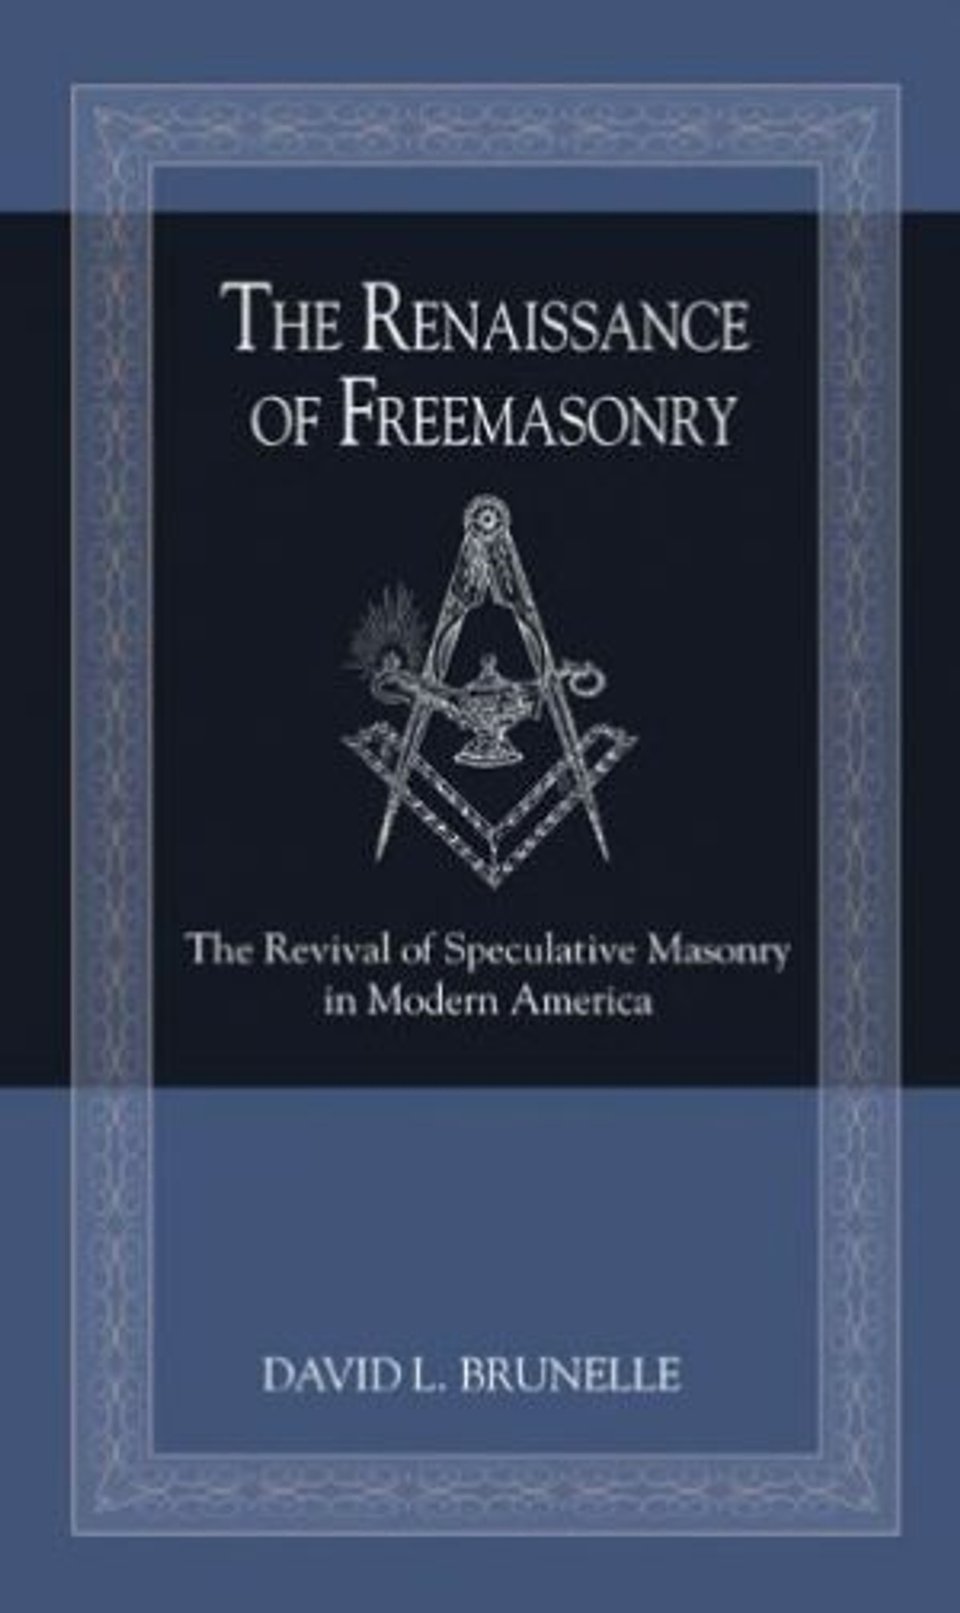 The Renaissance of Freemasonry: The Revival of Speculative Masonry in Modern America book by David L. Brunelle